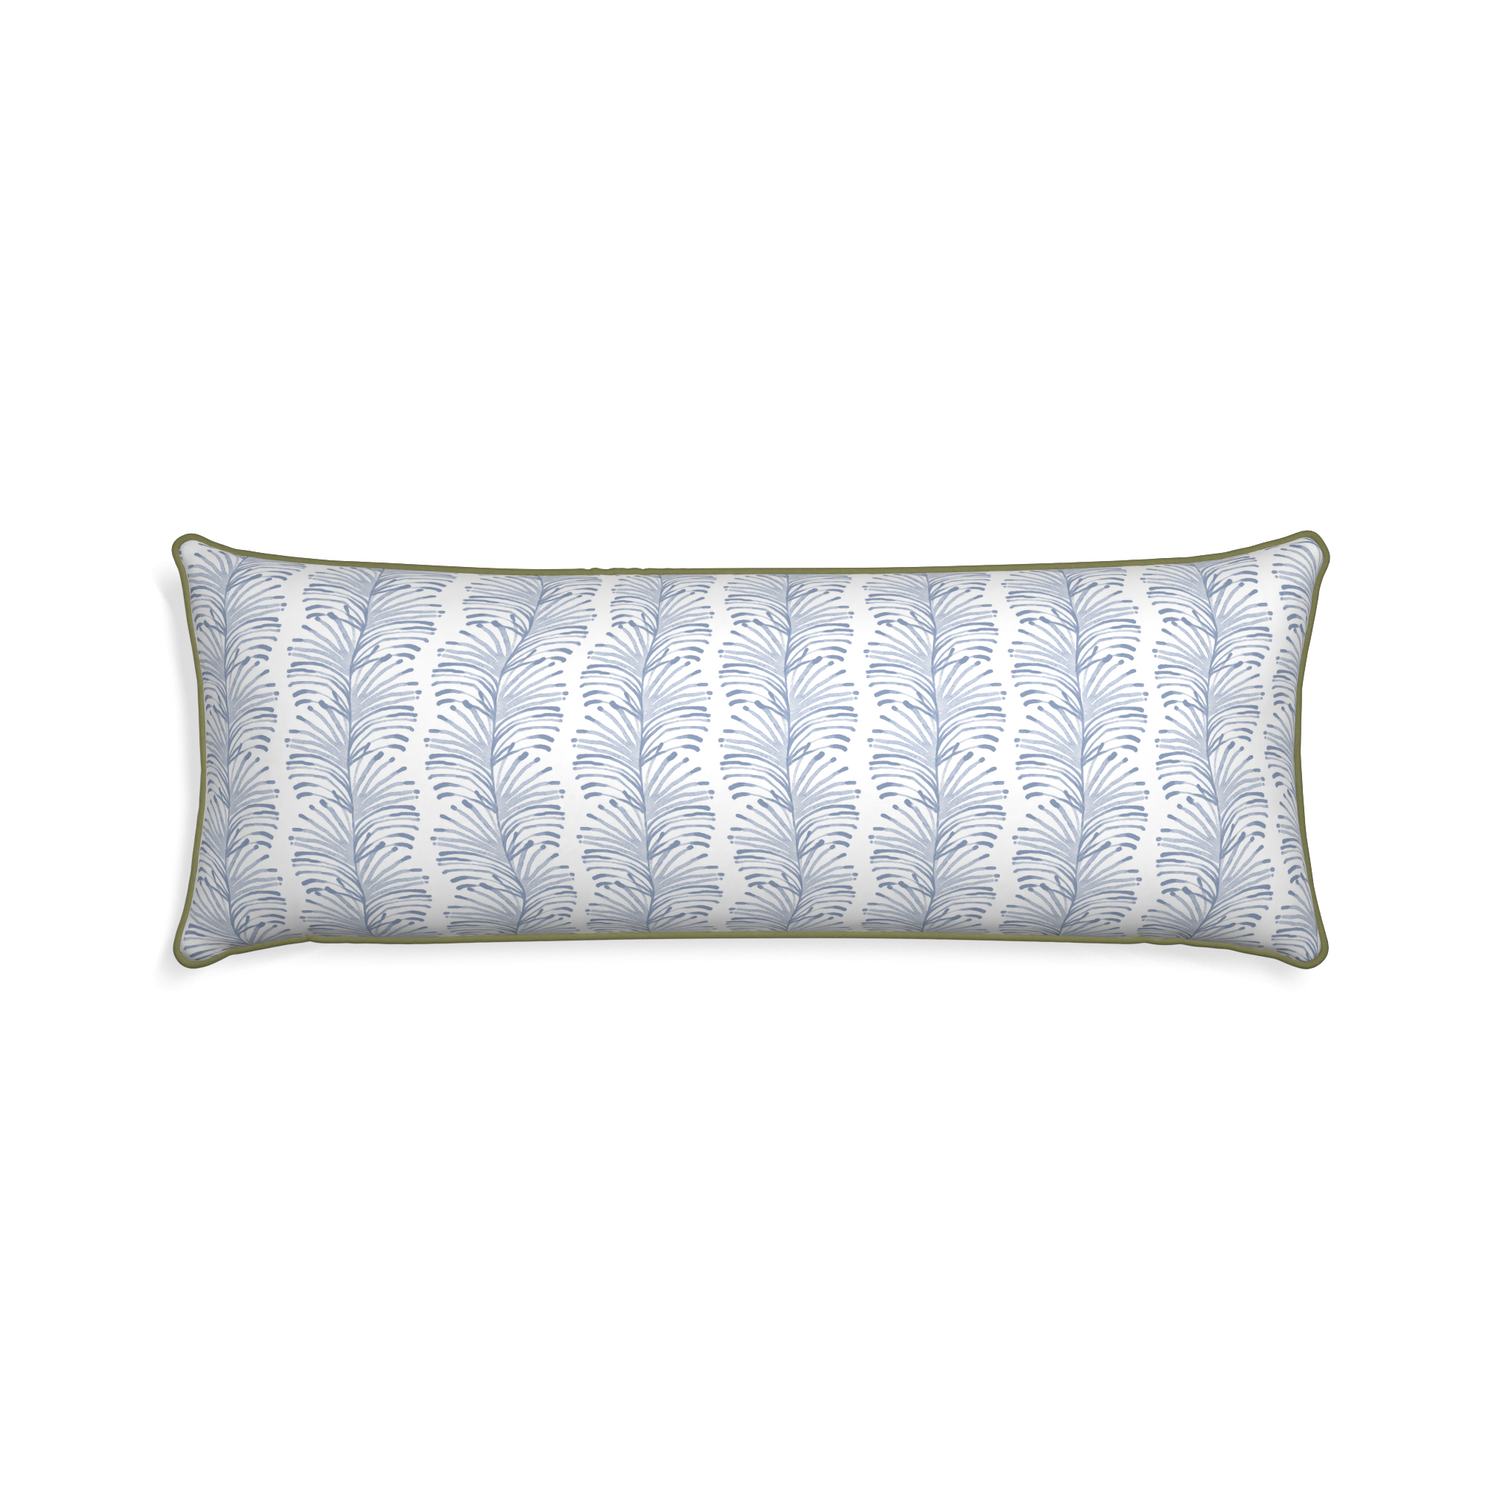 rectangle sky blue colored botanical stripe pillow with moss green piping